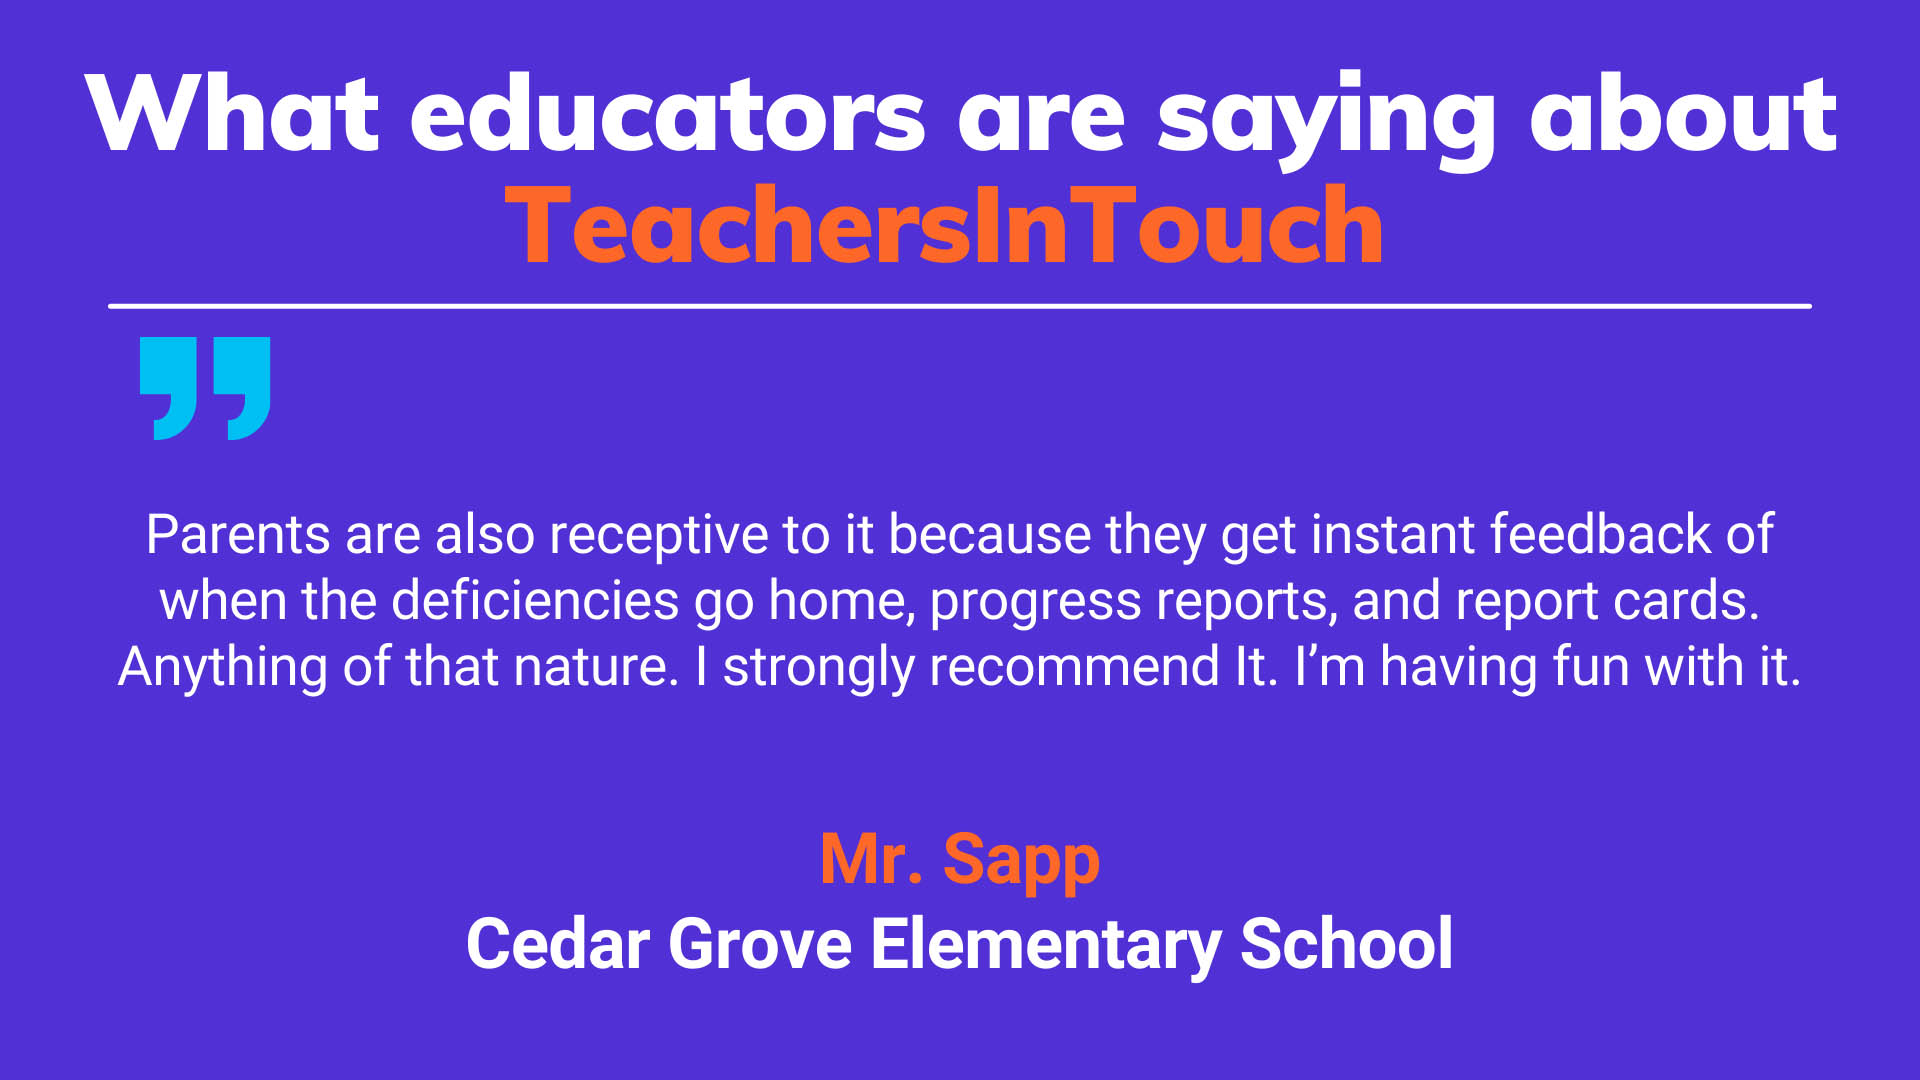 What educators are saying about us